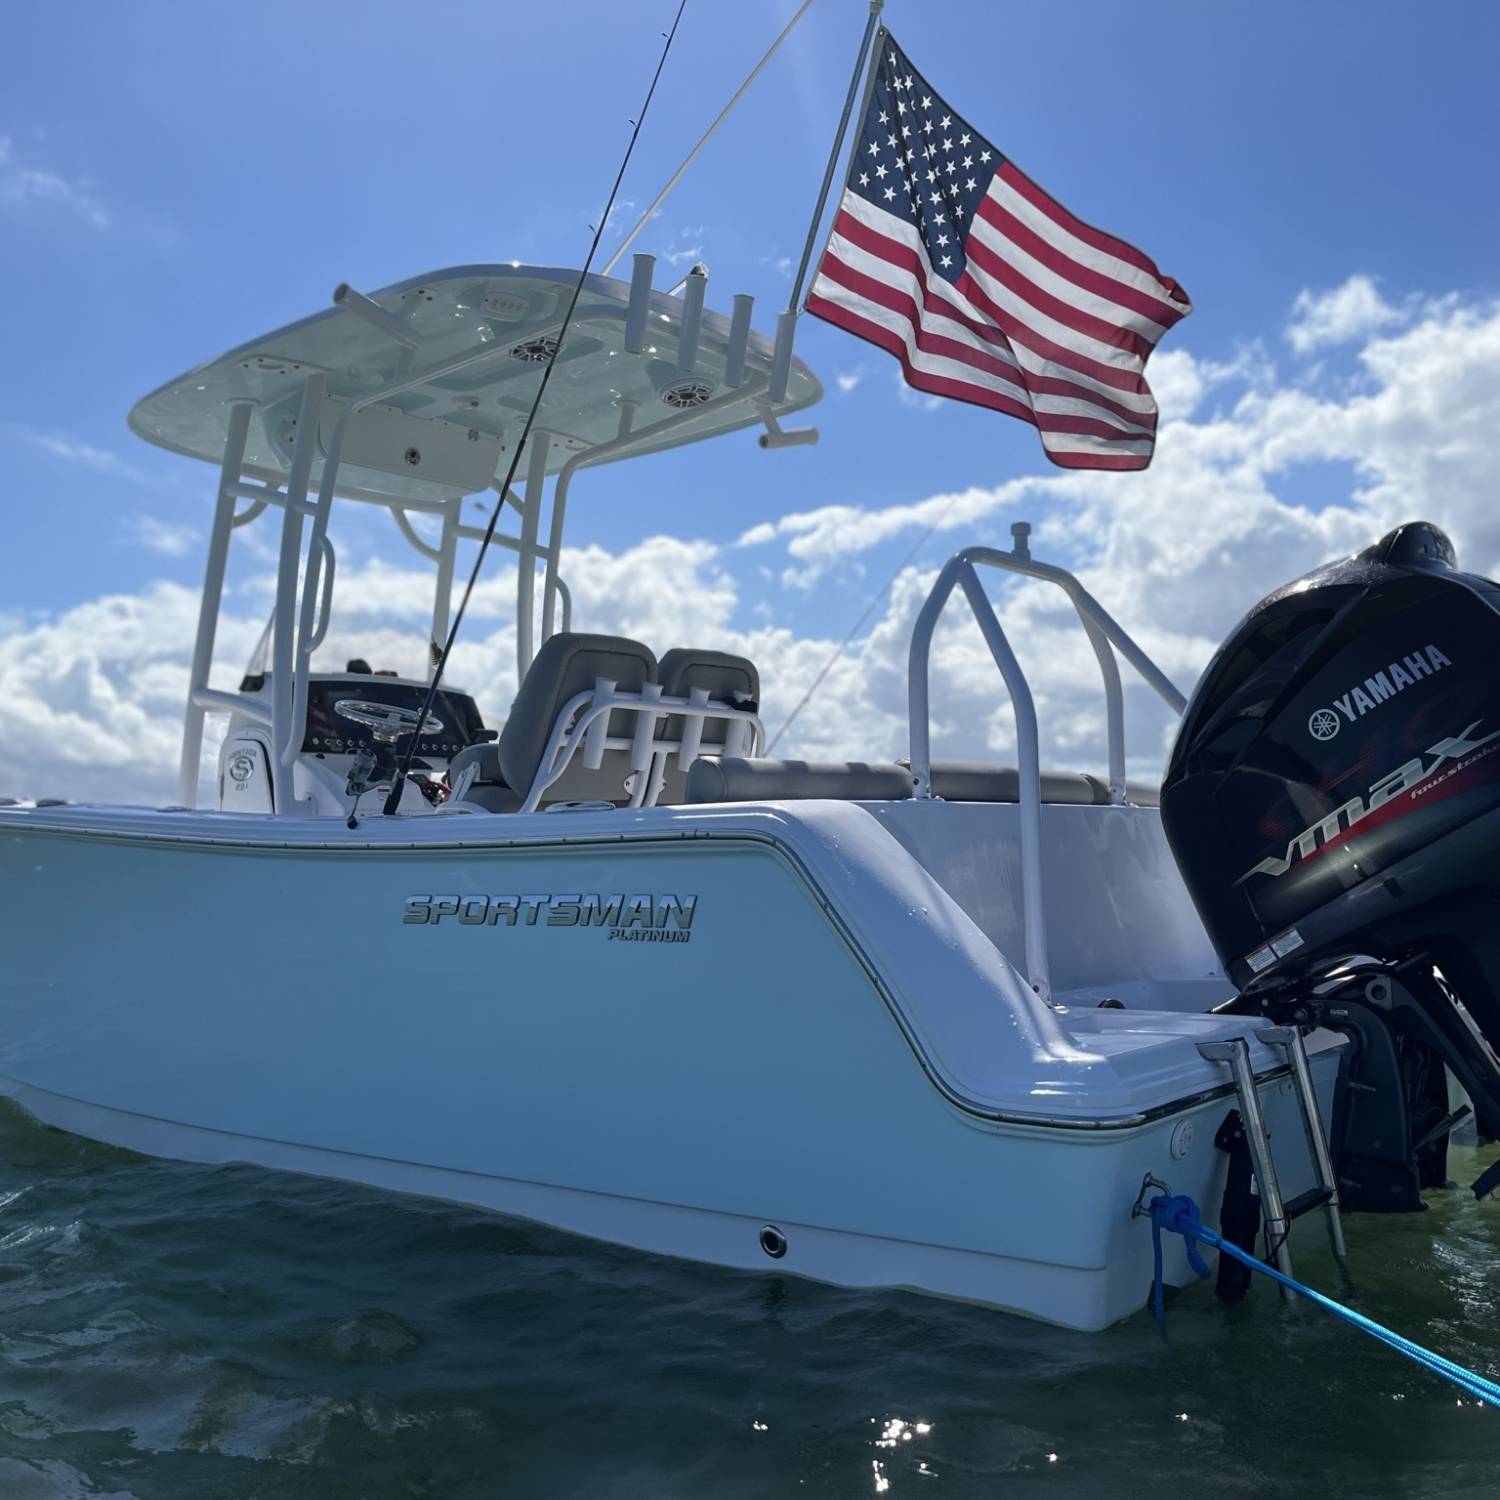 Title: River Warrior! - On board their Sportsman Heritage 231 Center Console - Location: Sebastian, FL. Participating in the Photo Contest #SportsmanMay